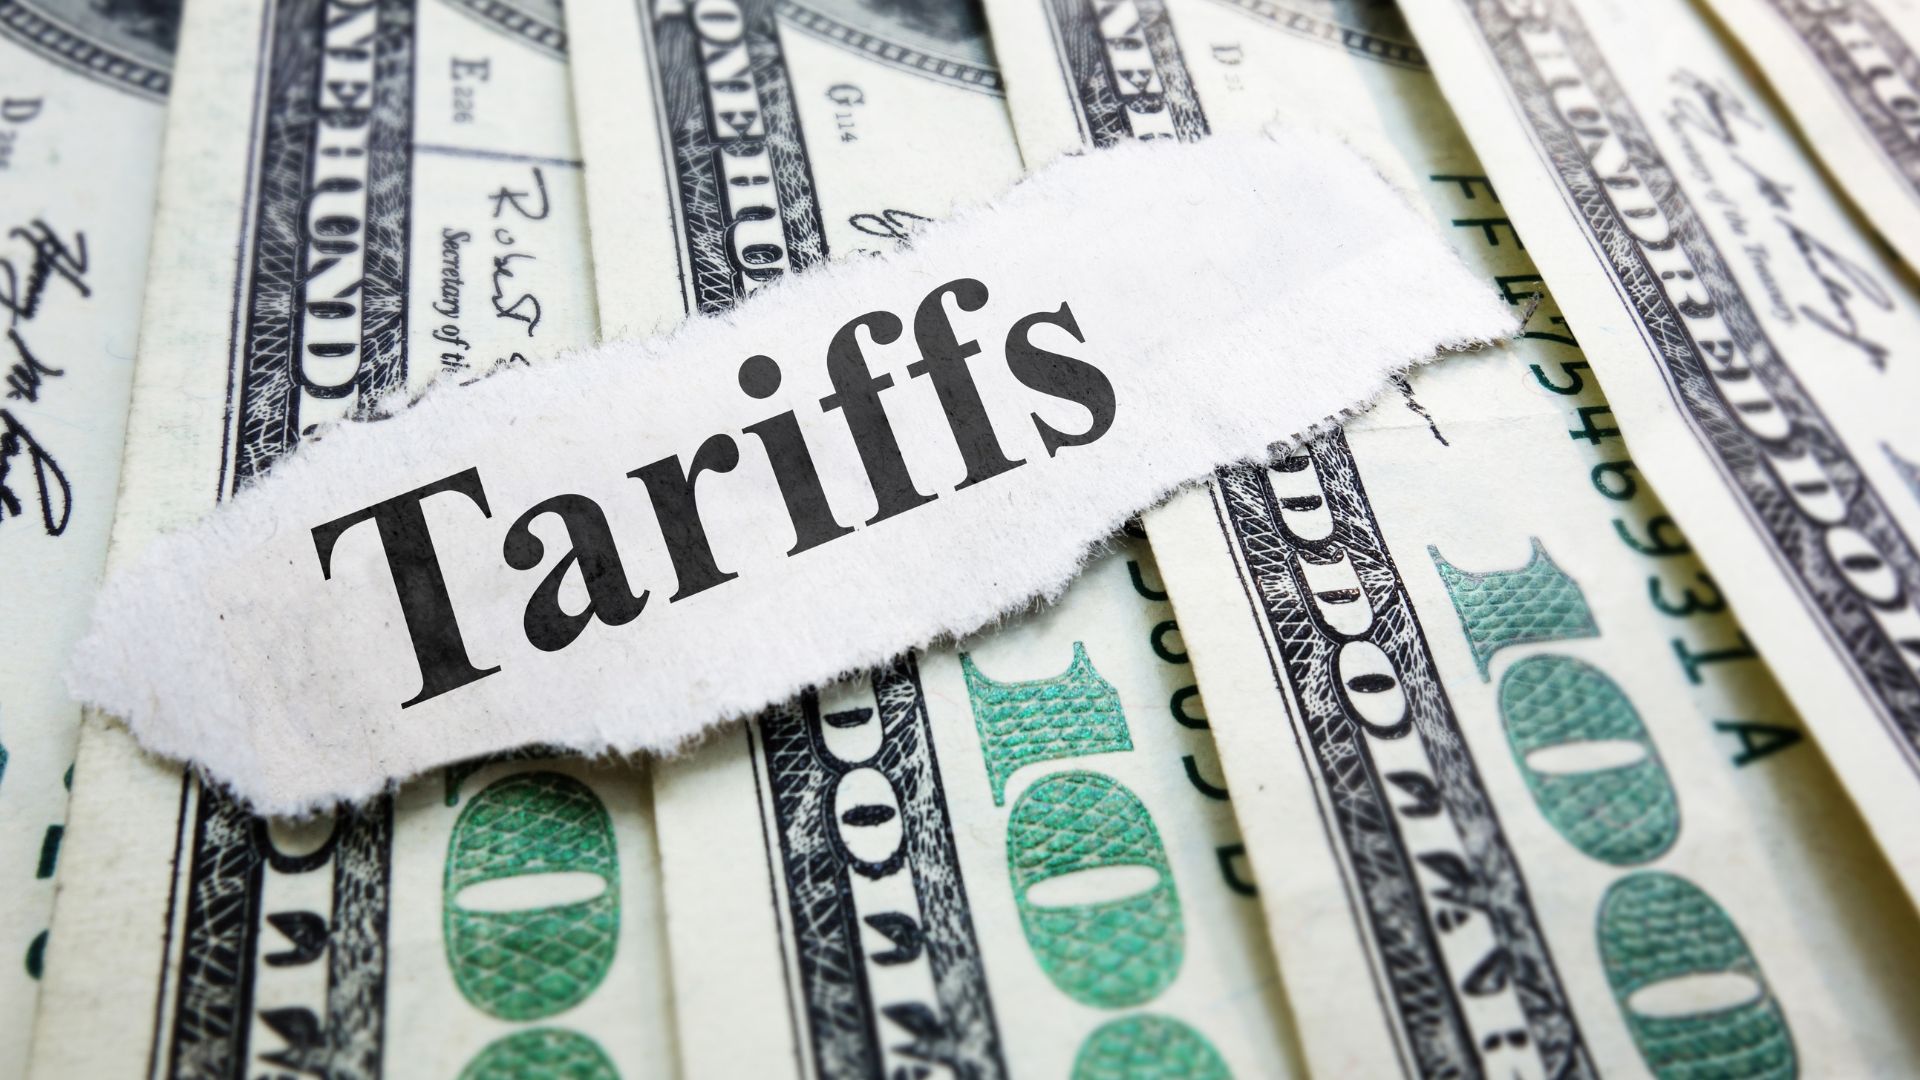 Types of Tariffs – Section 201, Section 232, & Section 301